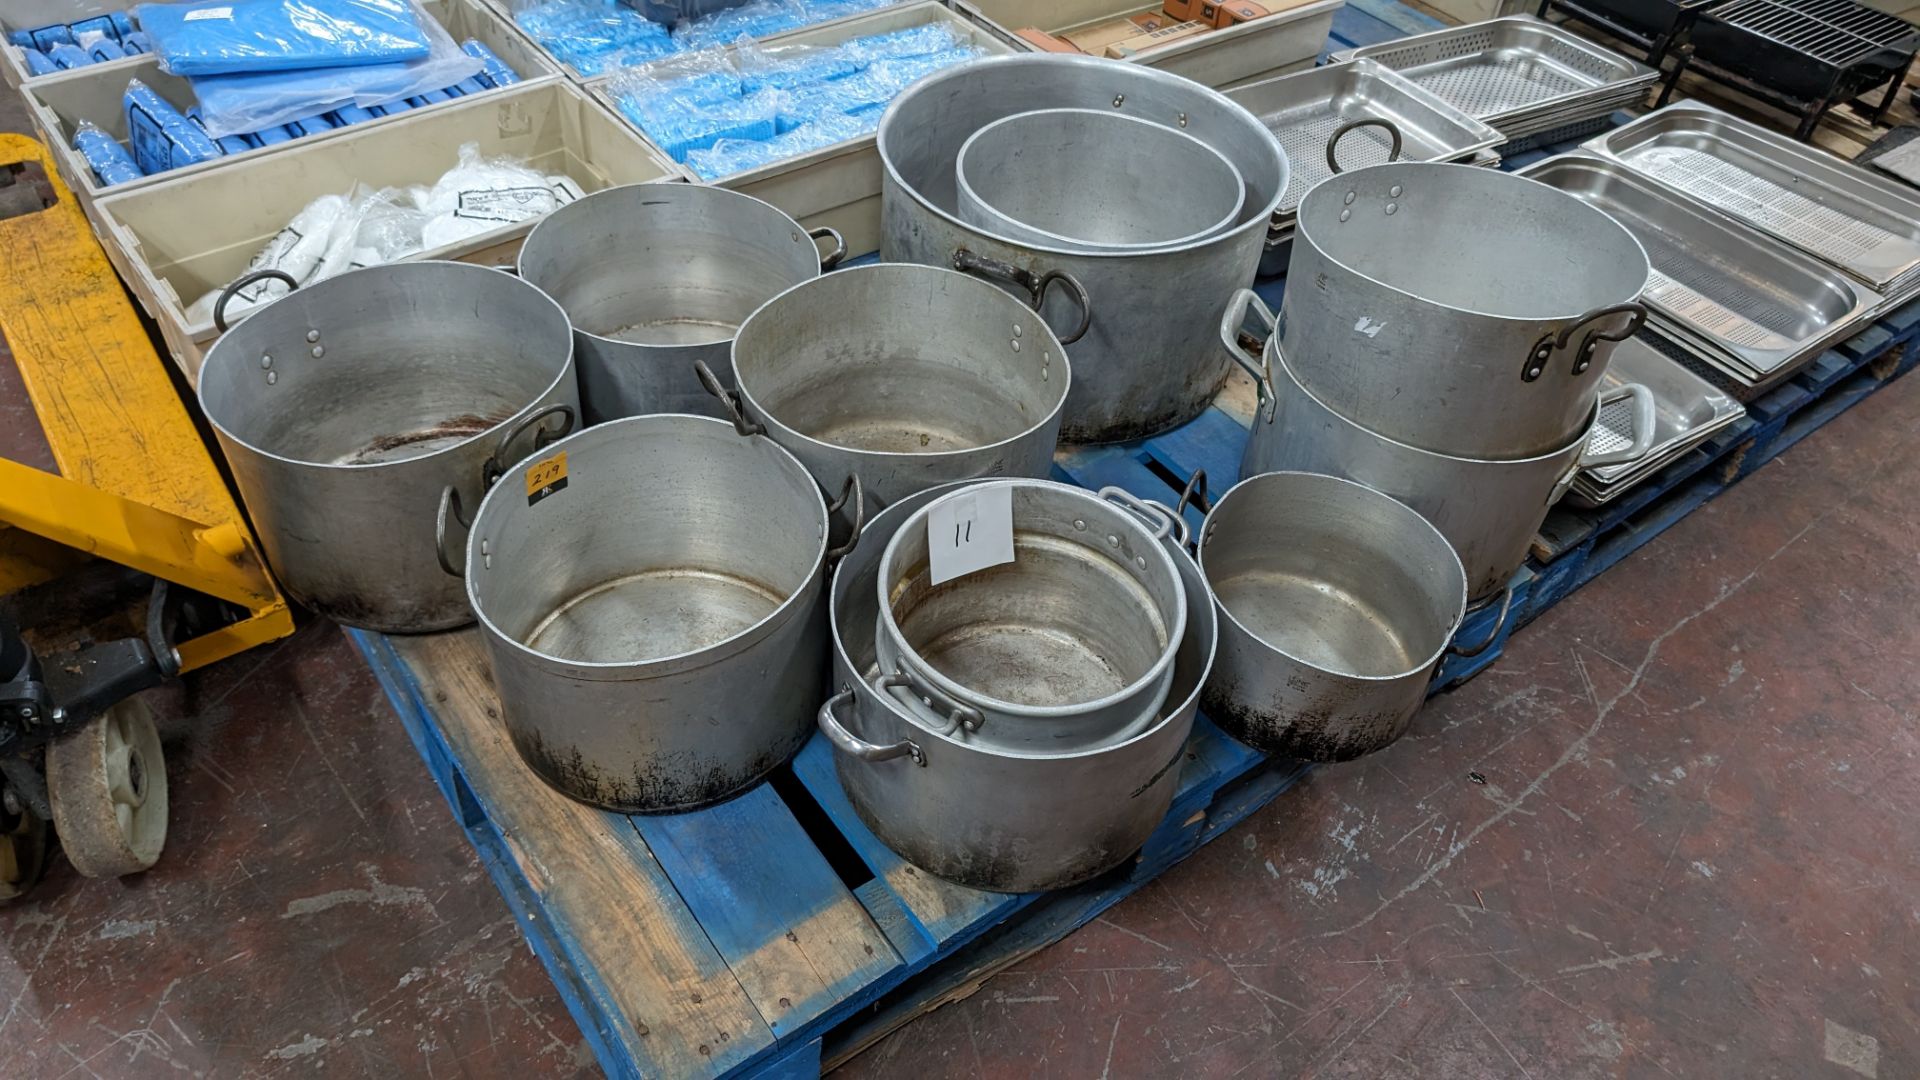 The contents of a pallet of large stockpots, comprising 11 pieces in total